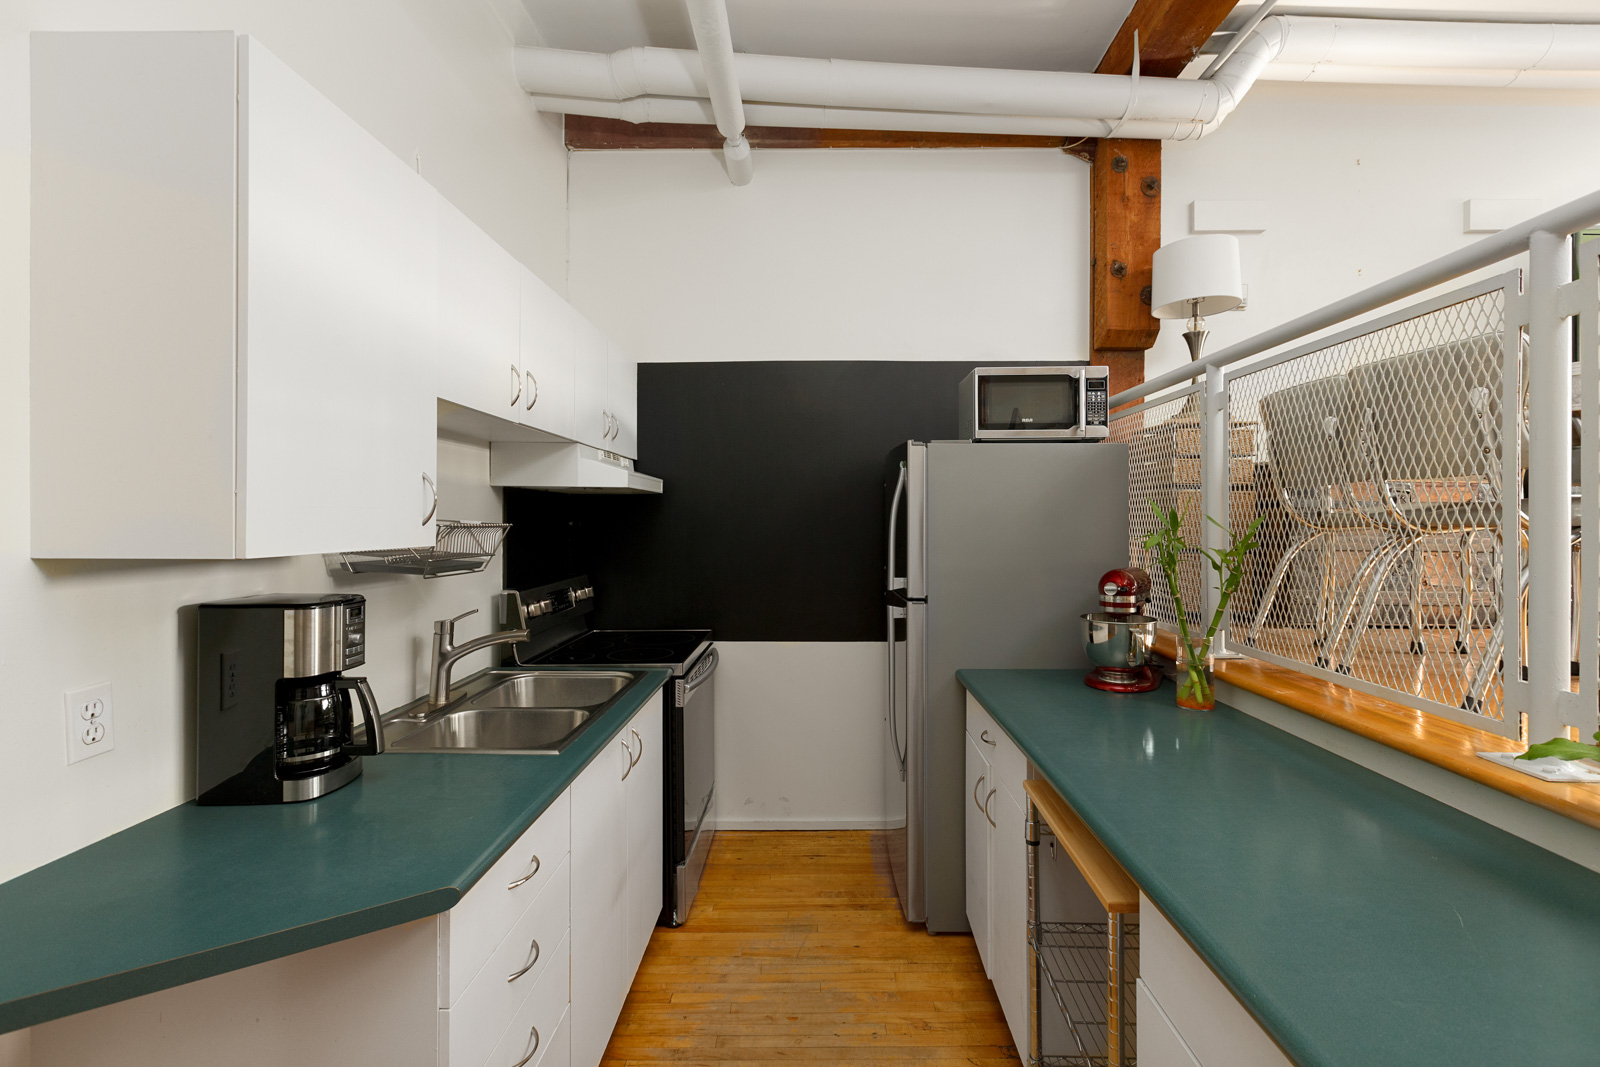 kitchen with dark grey countertops and hardwood floors and ventilation pipes on ceiling in rental condo